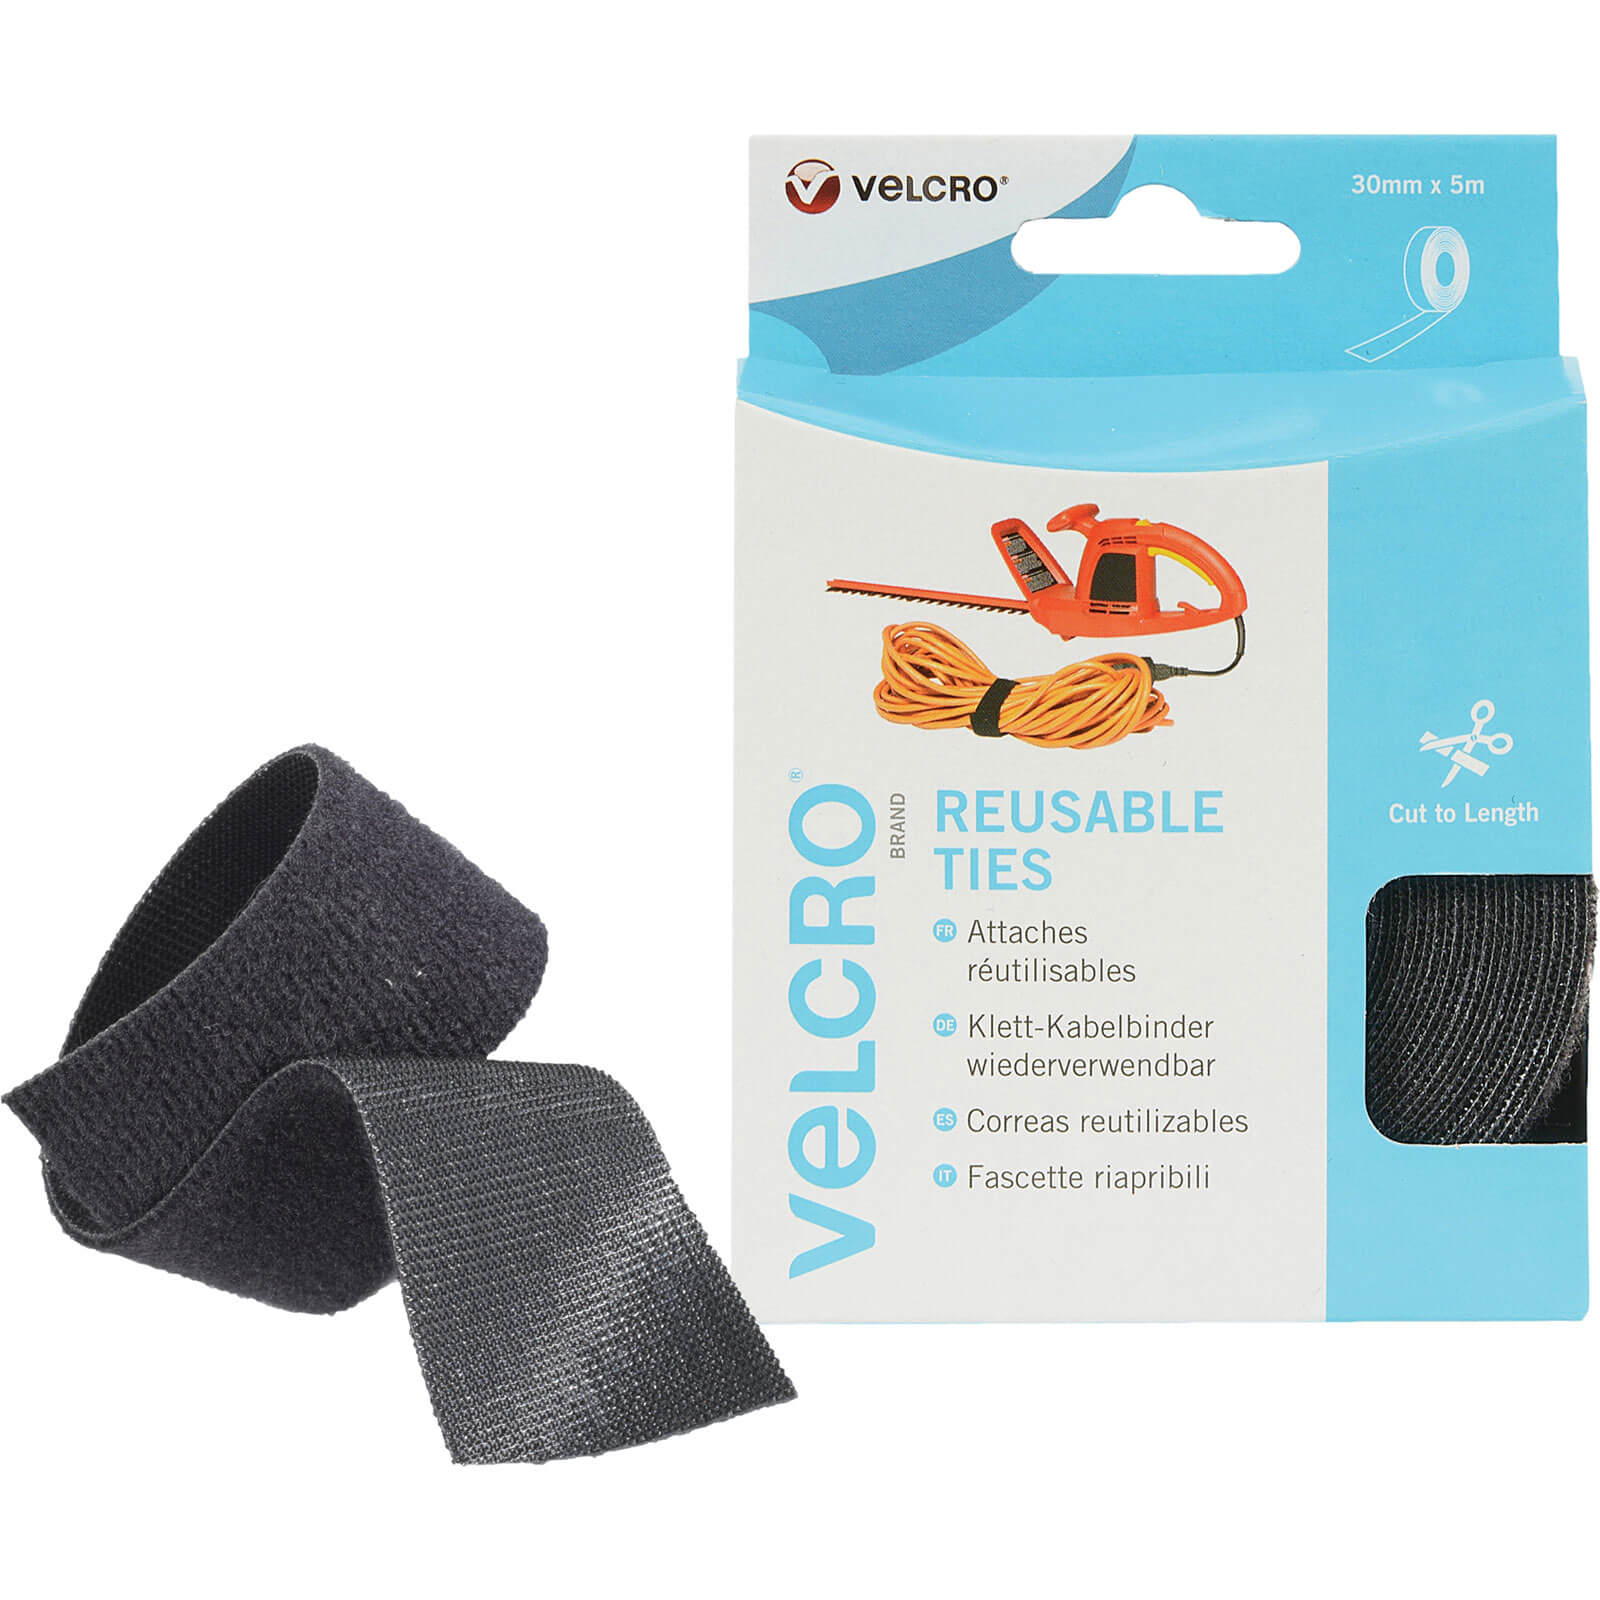 Photos - Cable Tie / Pipe Clamp Brand Velcro Self Gripping Ties Black 30mm 5m Pack of 1 